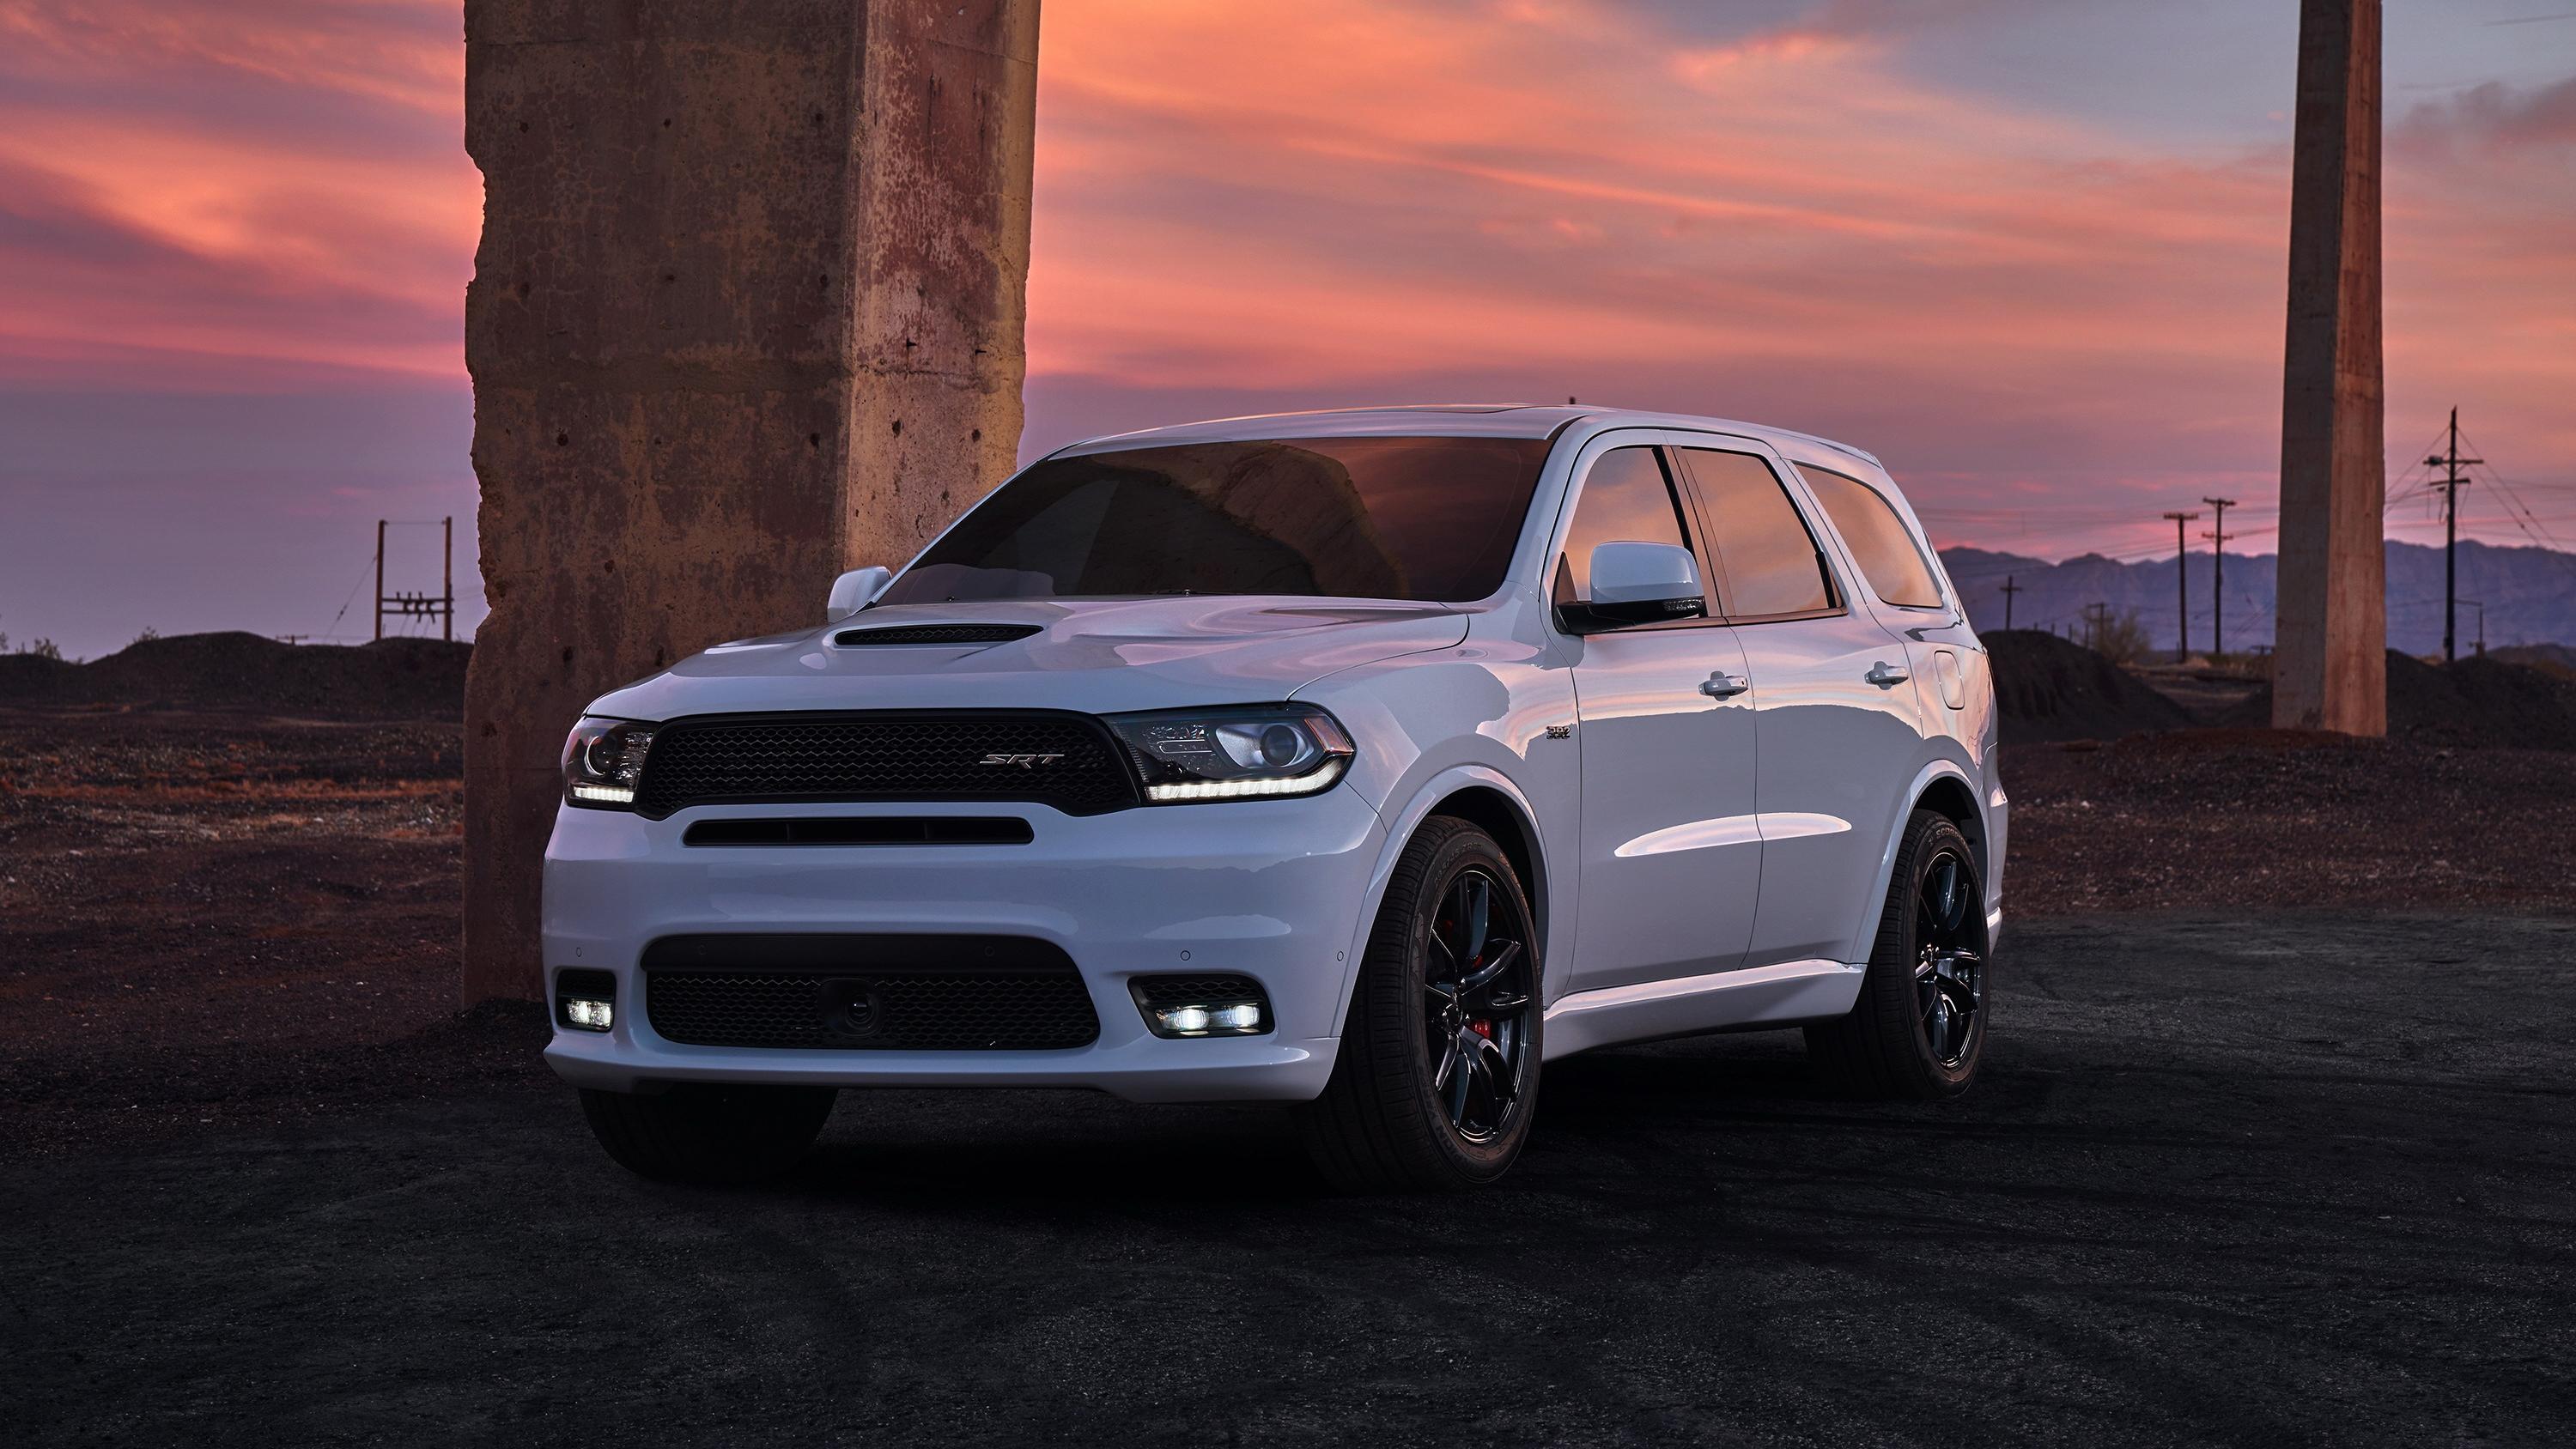 Wallpaper Of The Day: 2018 Dodge Durango SRT Picture, Photo